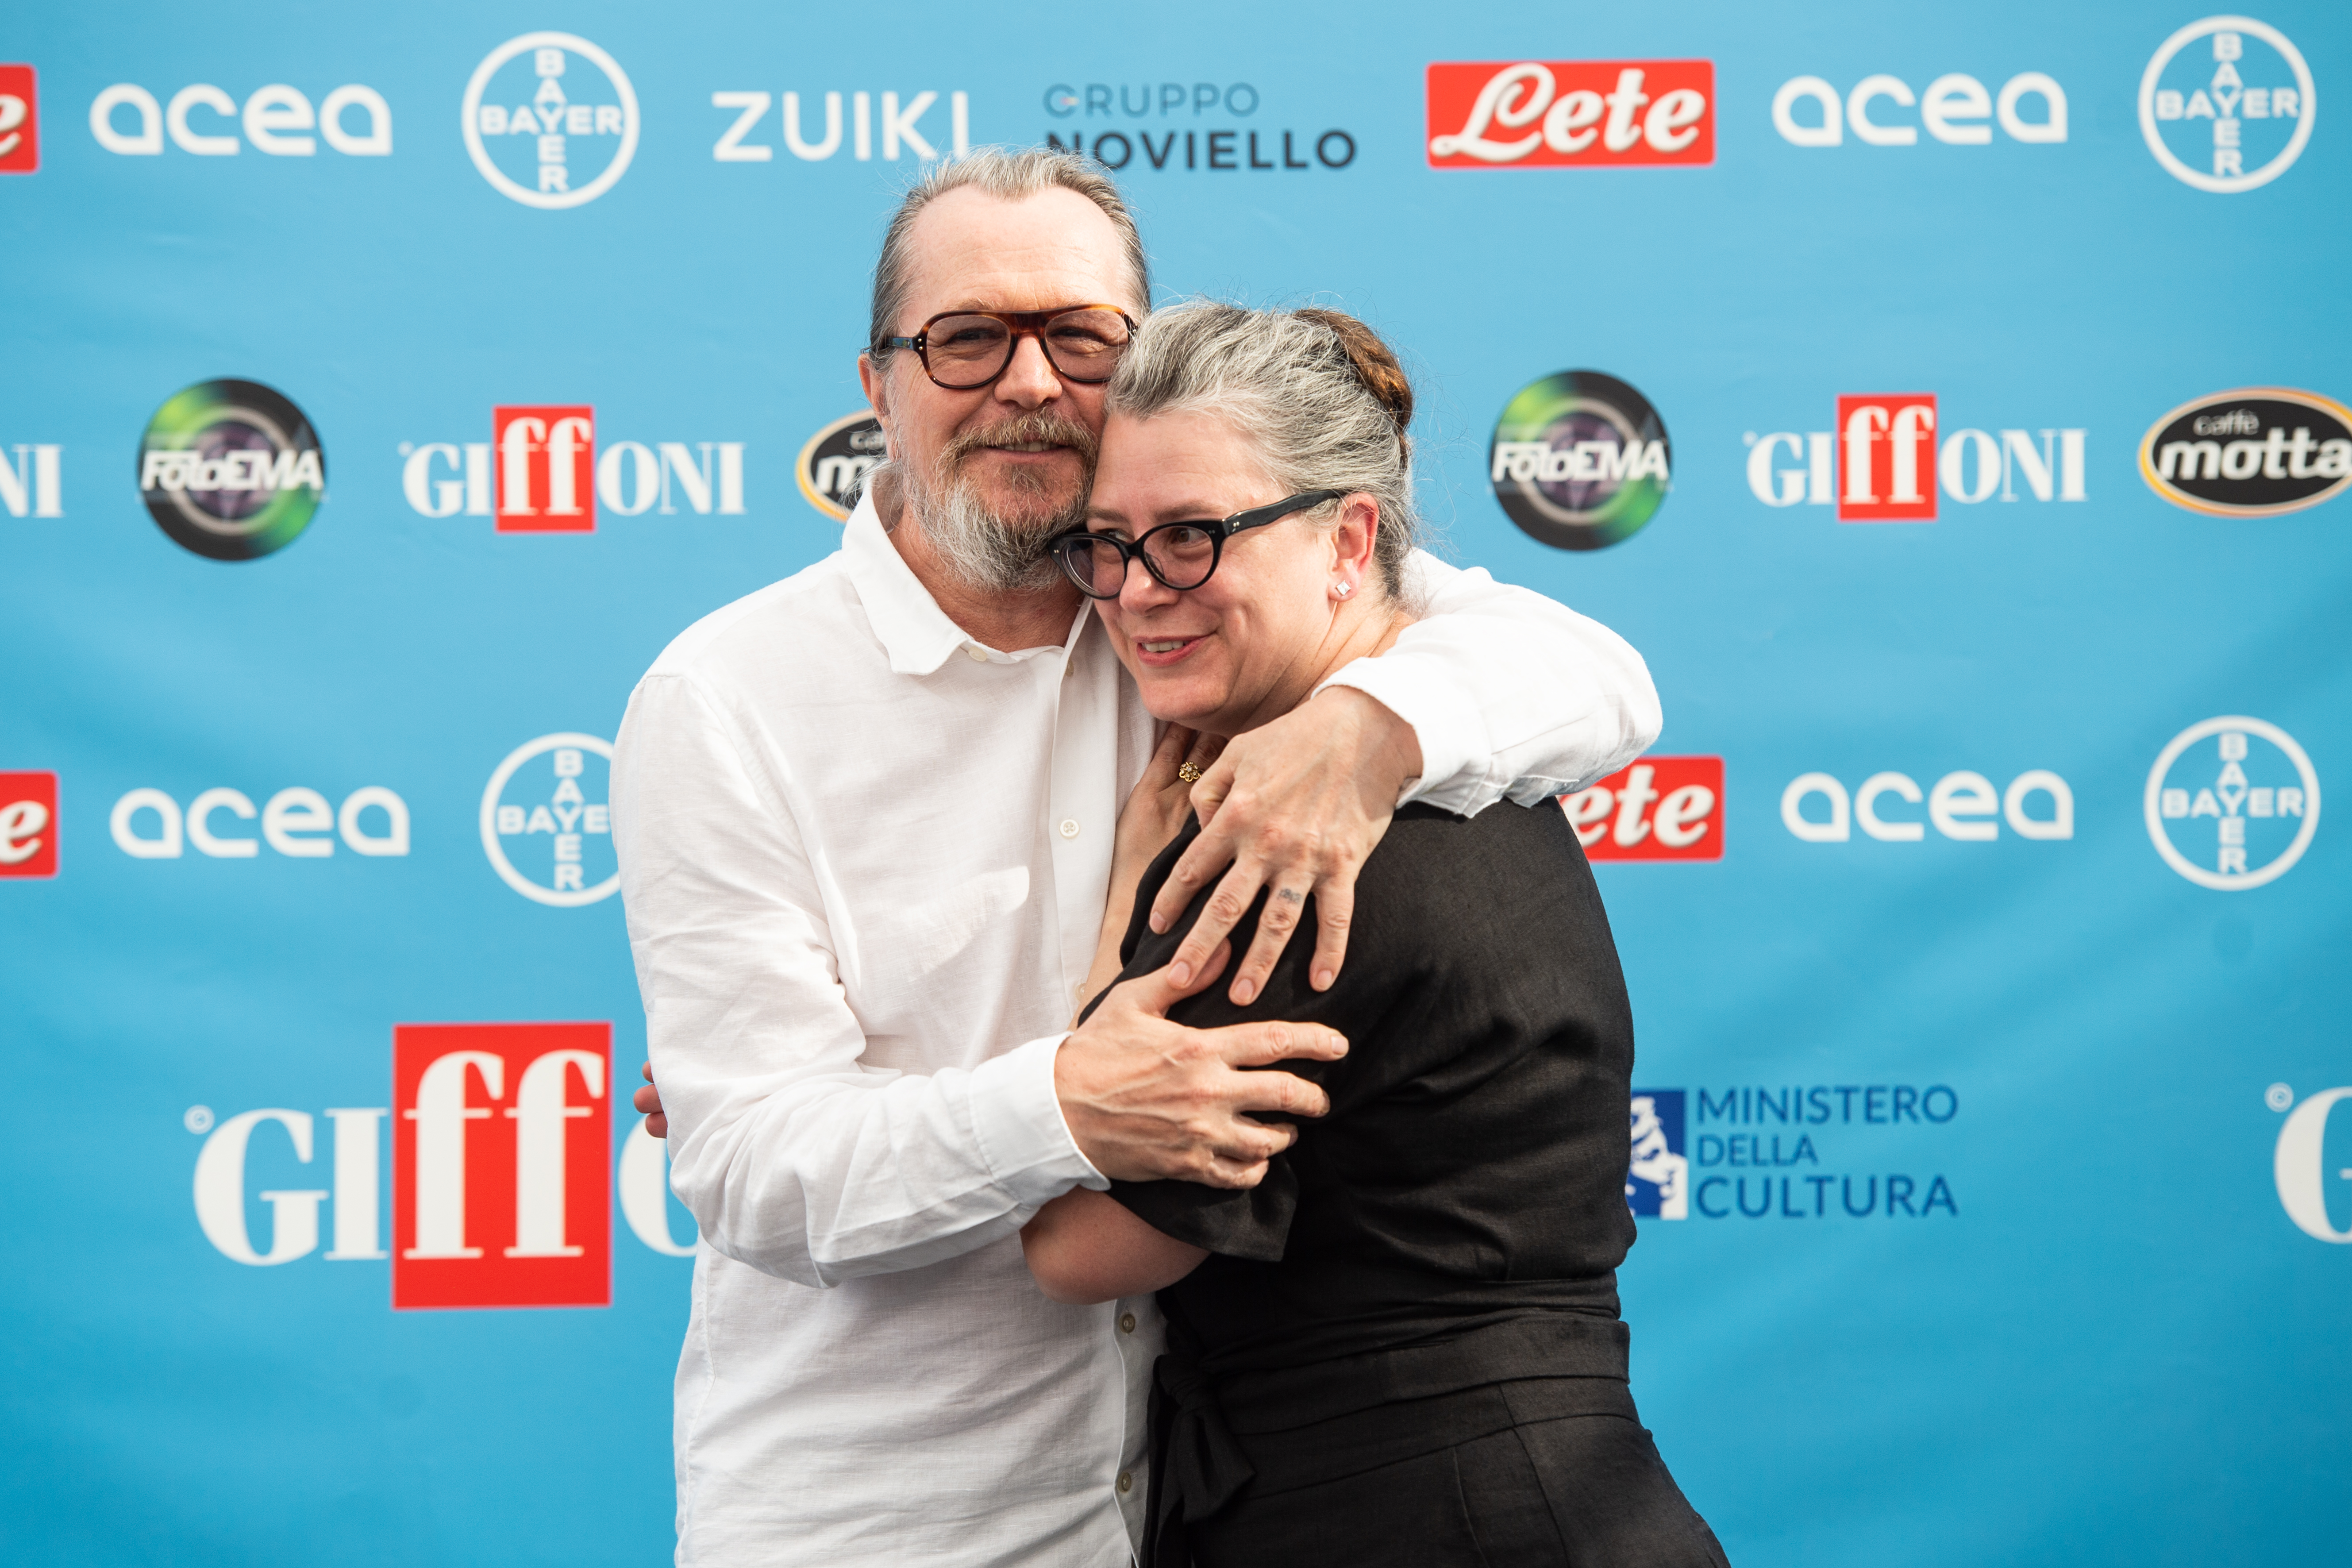 Actor Gary Oldman and his wife Gisele Schmidt attend the photocall at the Giffoni Film Festival 2022 on July 28, 2022 in Giffoni Valle Piana, Italy | Source: Getty Images